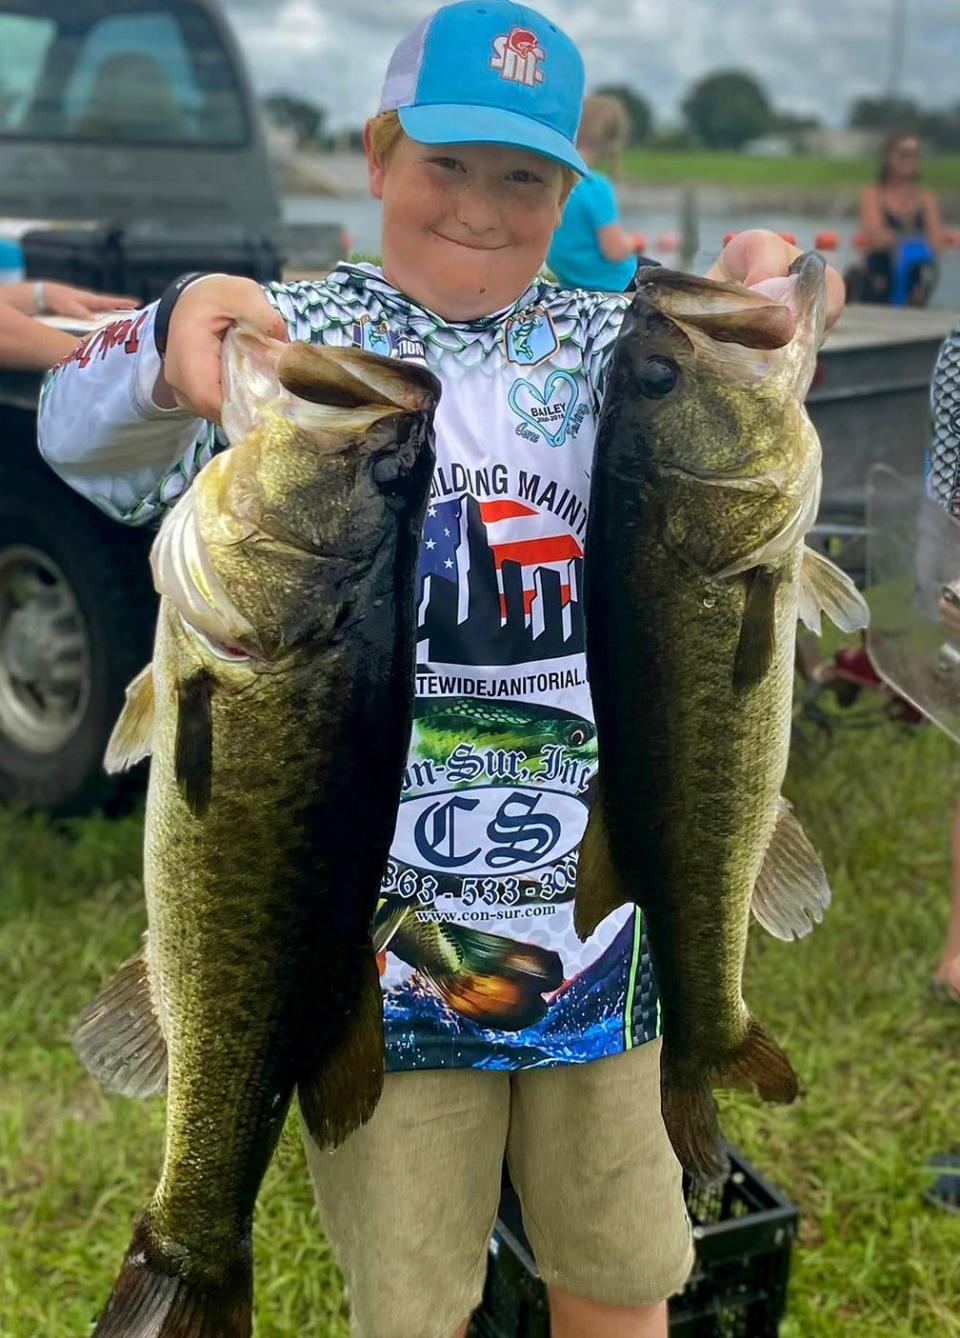 Jaxon Johnson had 15.02 pounds and big bass with a 7.16-pounder to win first place in the Junior Division of the Lakeland Junior Hawg Hunters tournament on Sept. 17 on the Kissimmee Chain.